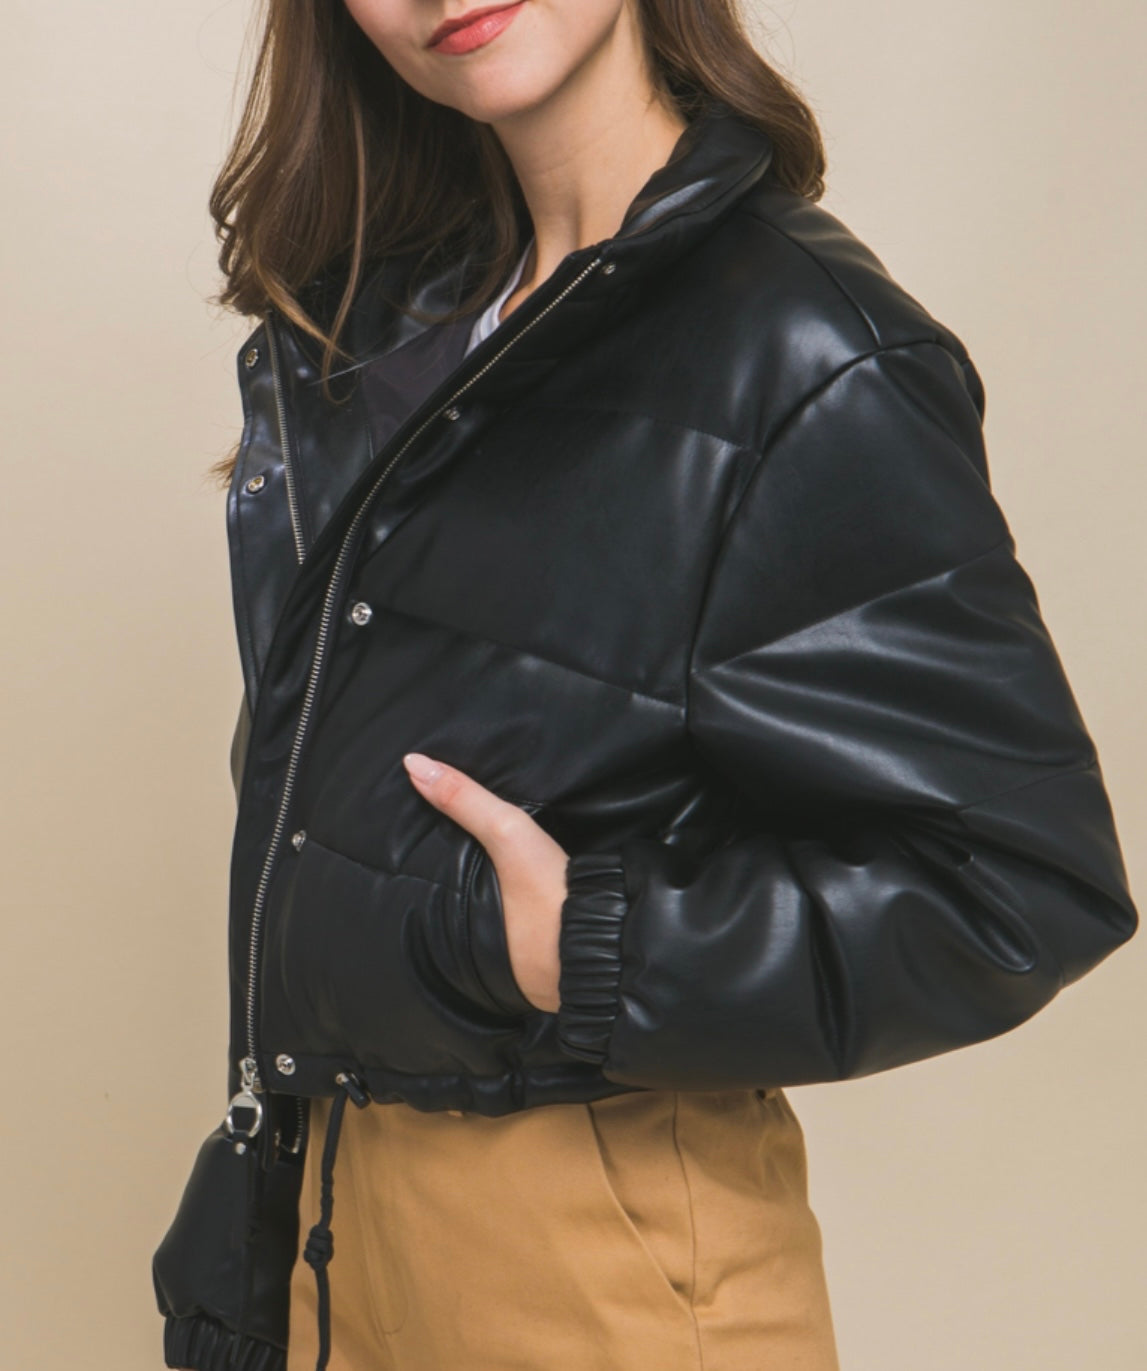 The “On The Move” Faux Leather Jacket